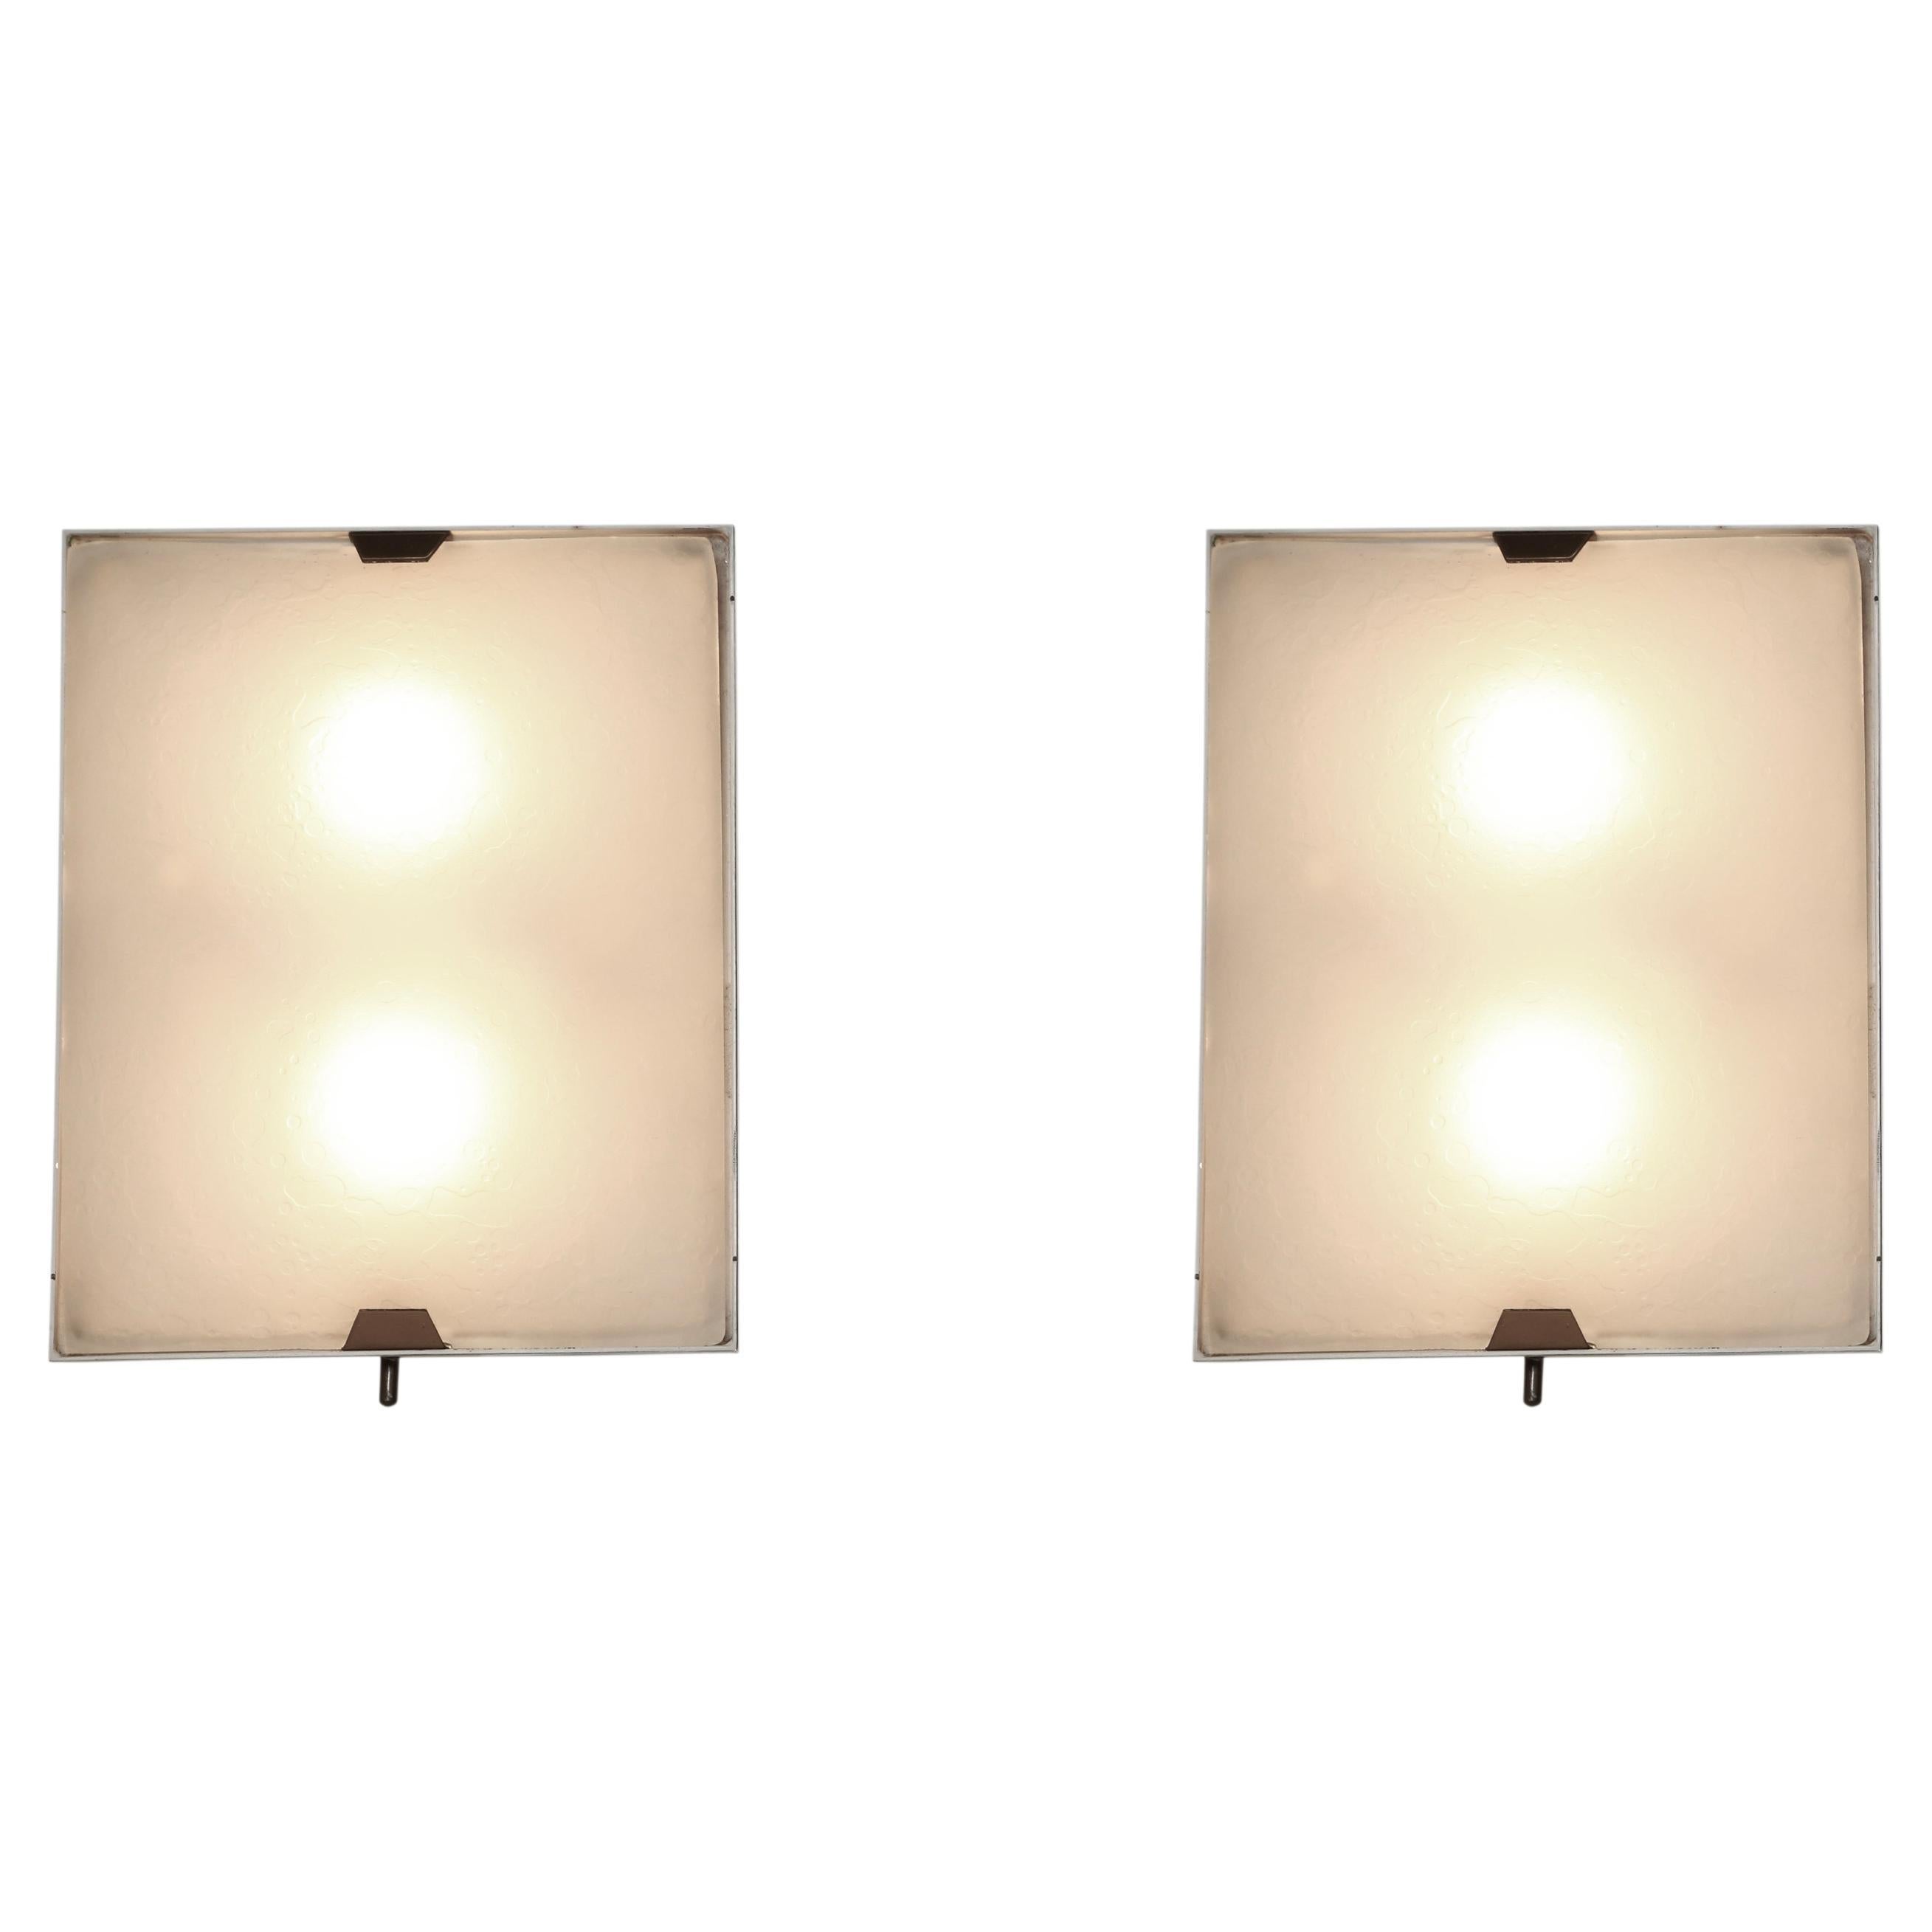 Stilnovo Wall Lights, a pair For Sale